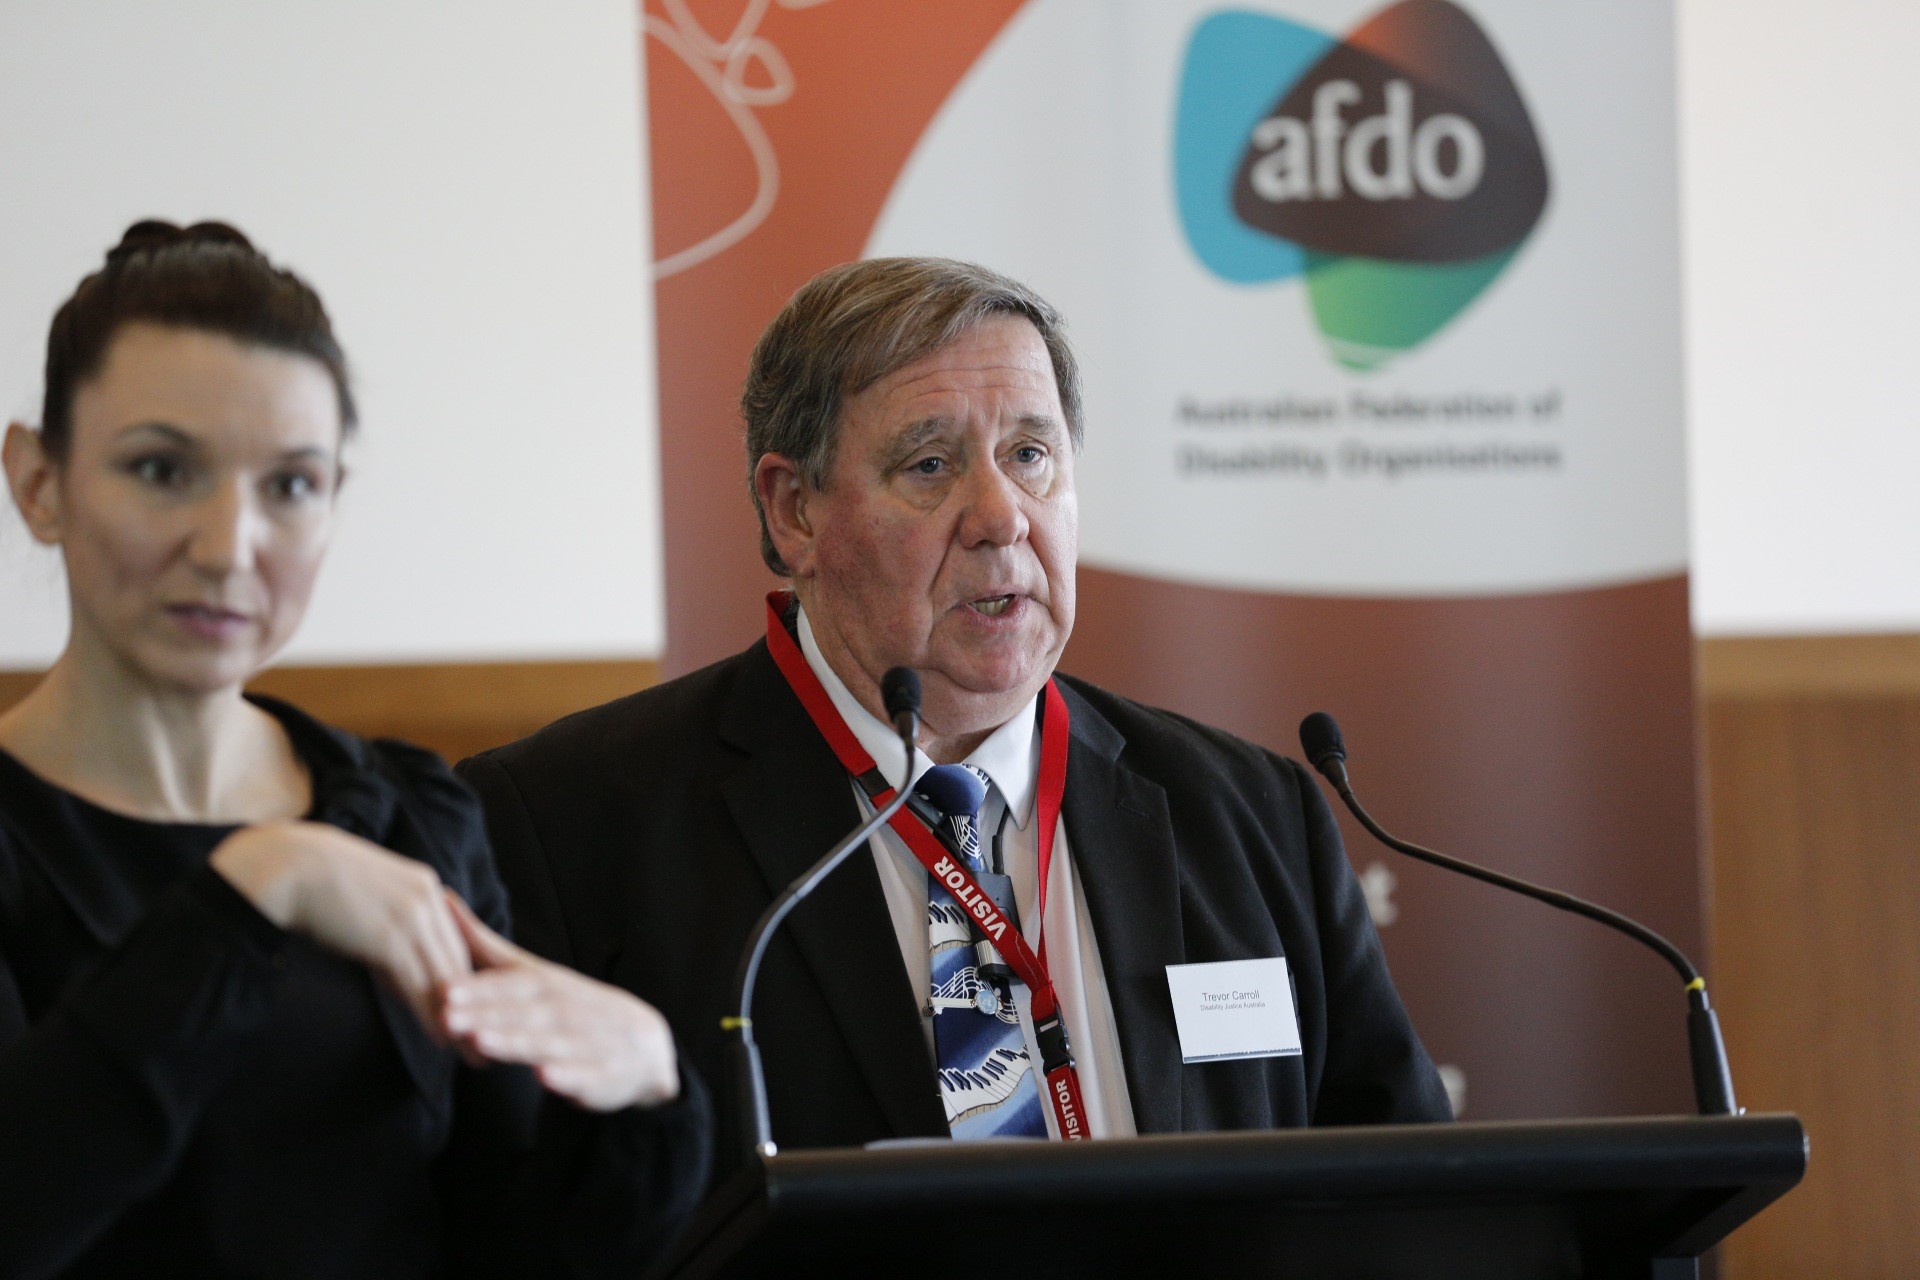 AFDO Vice President, Trevor Carroll speaking at the launch of the DSP Reports